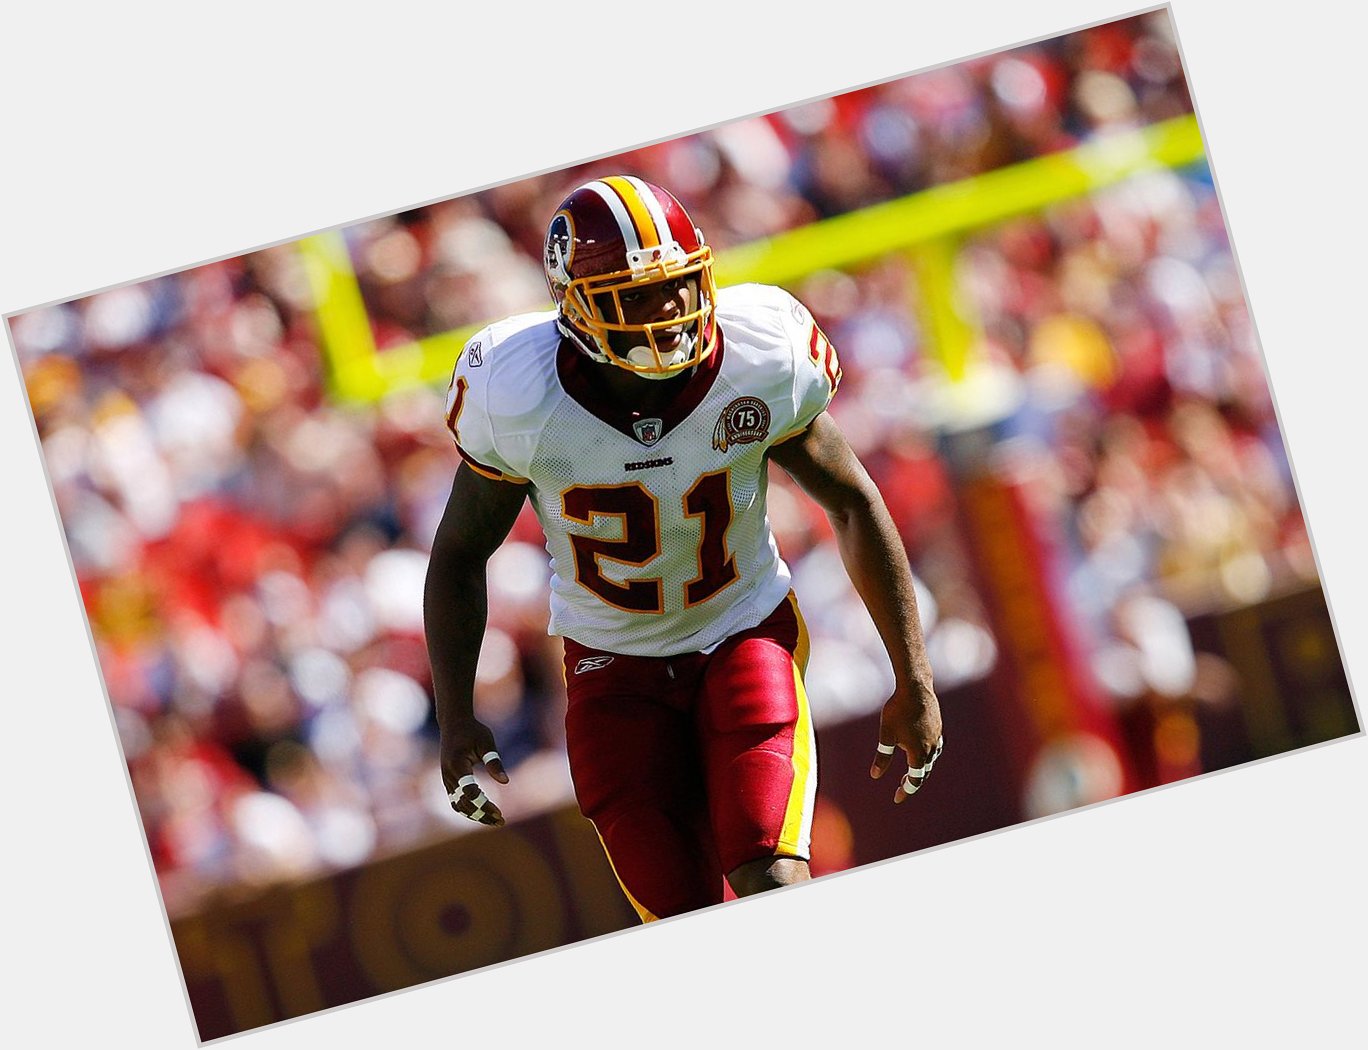 Happy birthday to the best player of all time! RIP Sean Taylor. Taylor would ve been 35 today.  